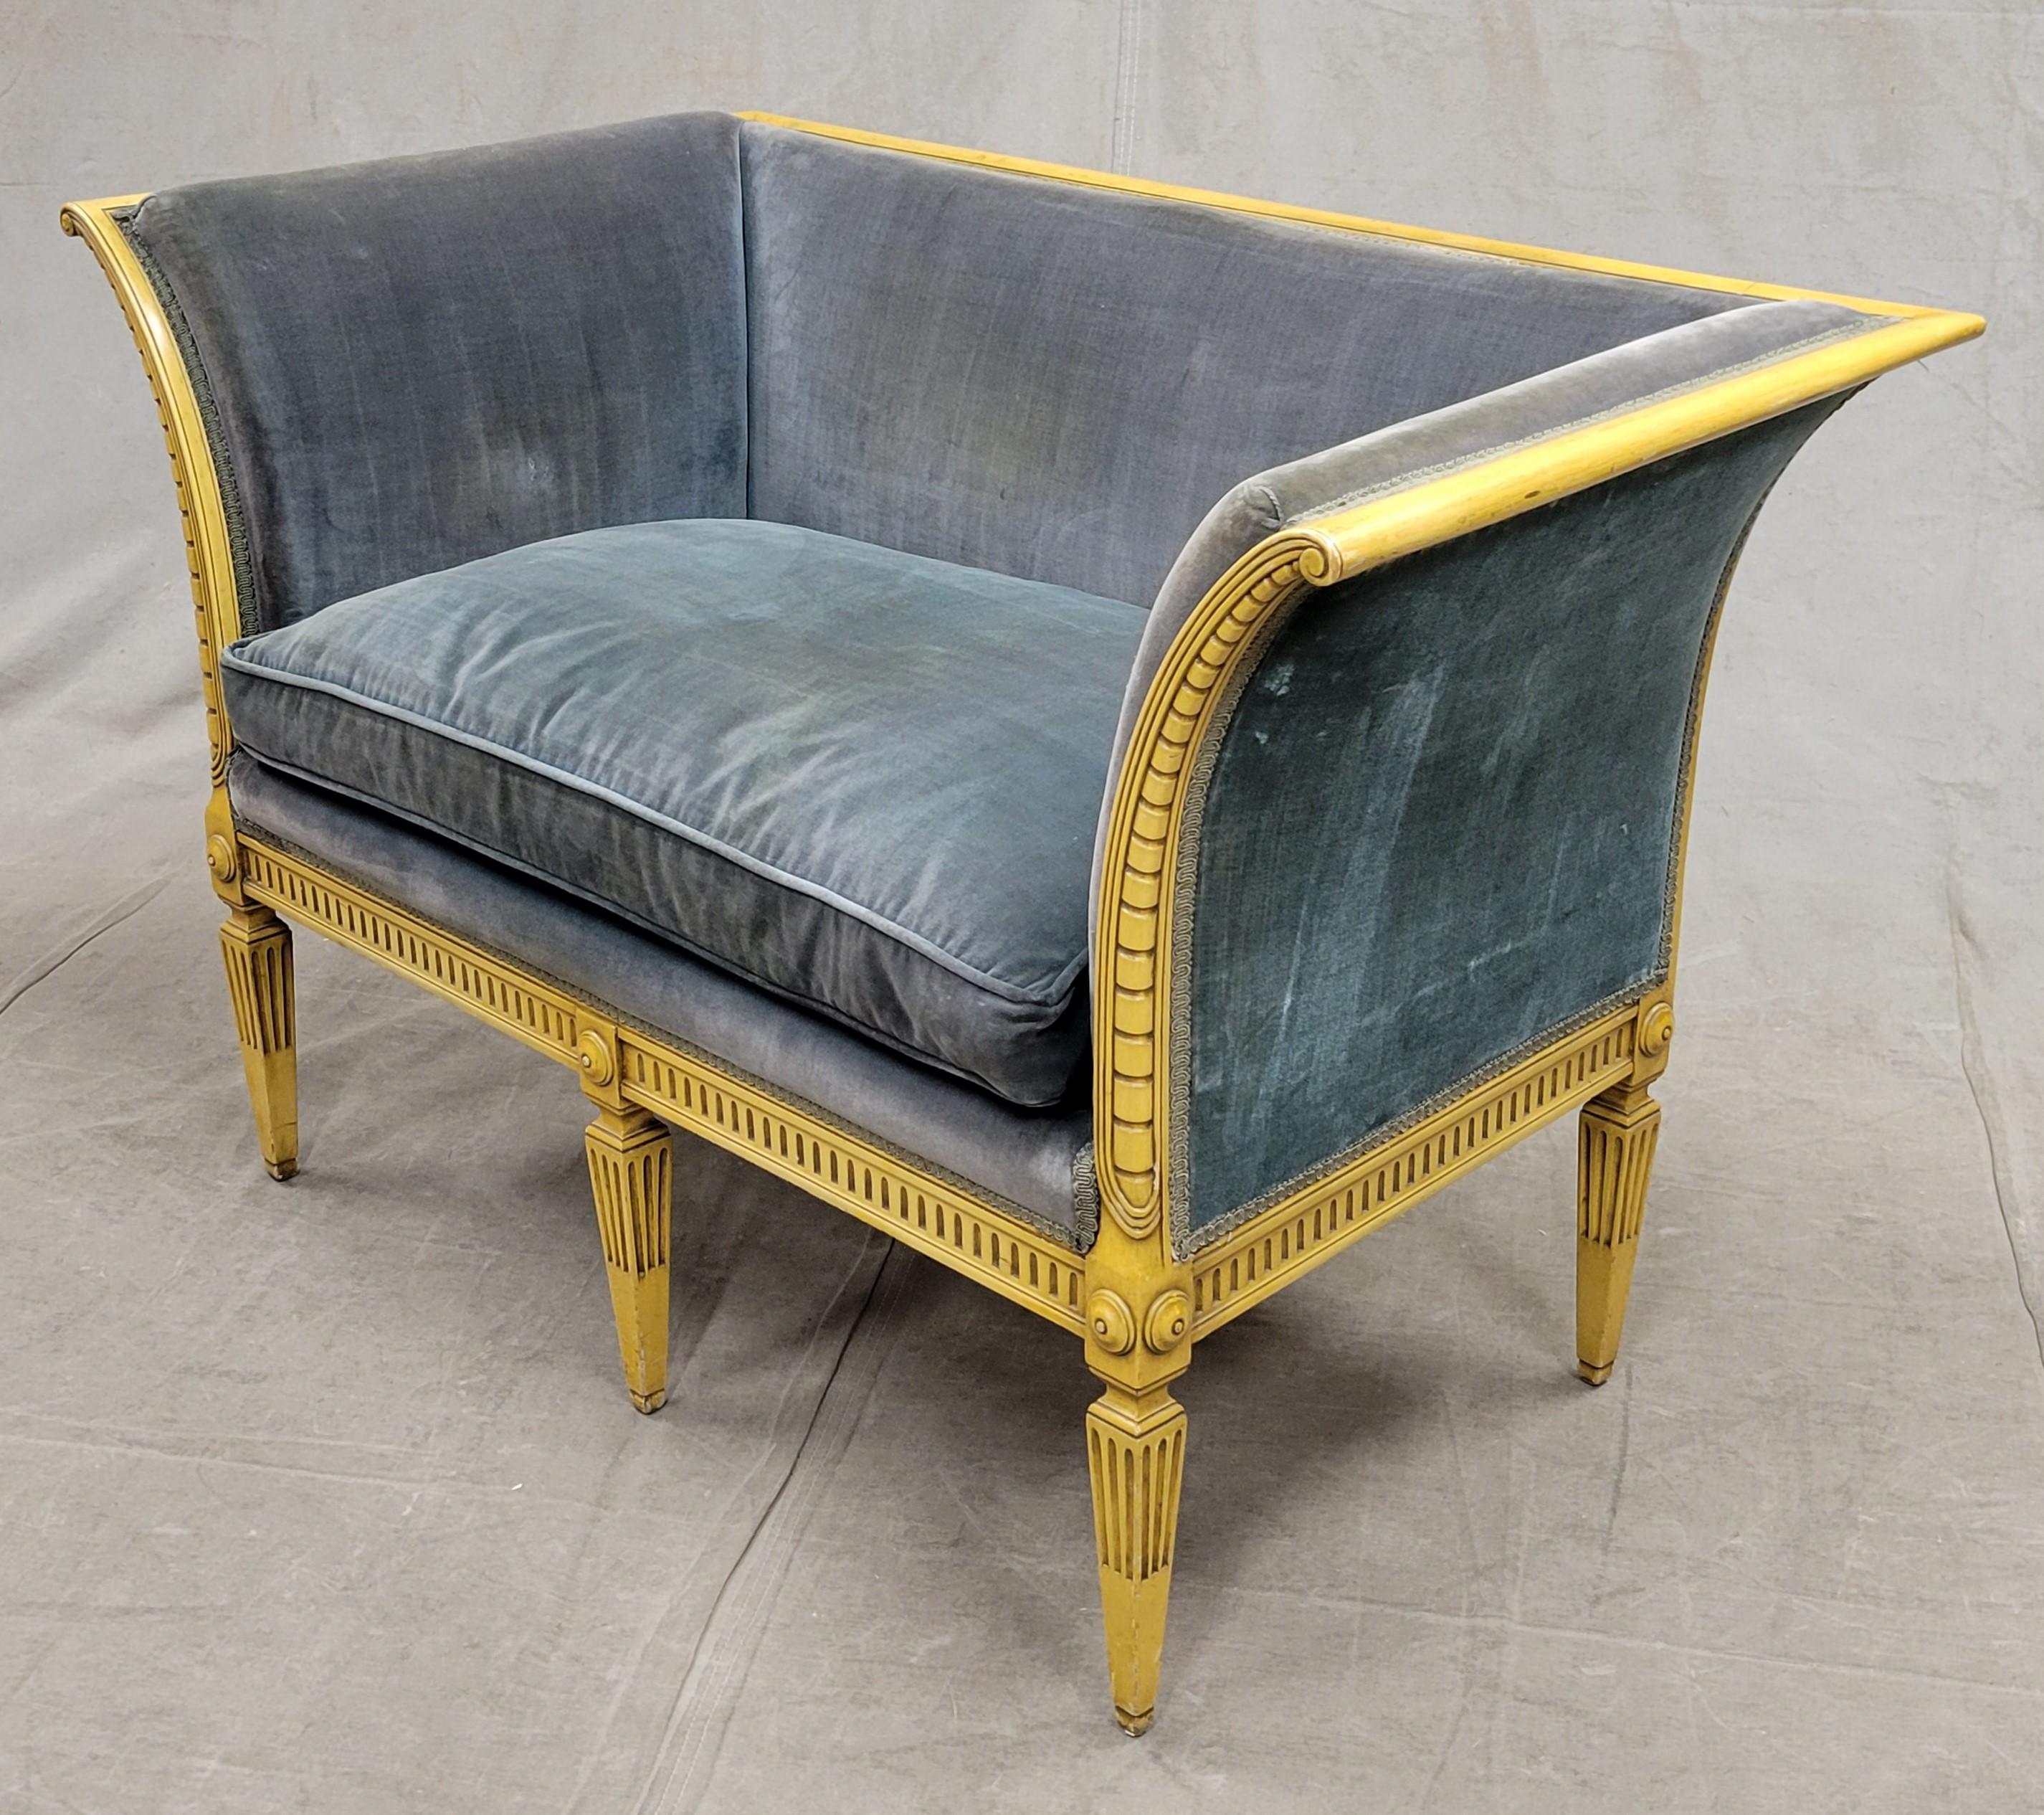 A gorgeous French neoclassical settee loveseat with green velvet upholstery. Likely made between the 1920s and 1940s. Stunning carved wood frame with sweeping arms has the original golden yellow paint. Neoclassical incised dart carving and